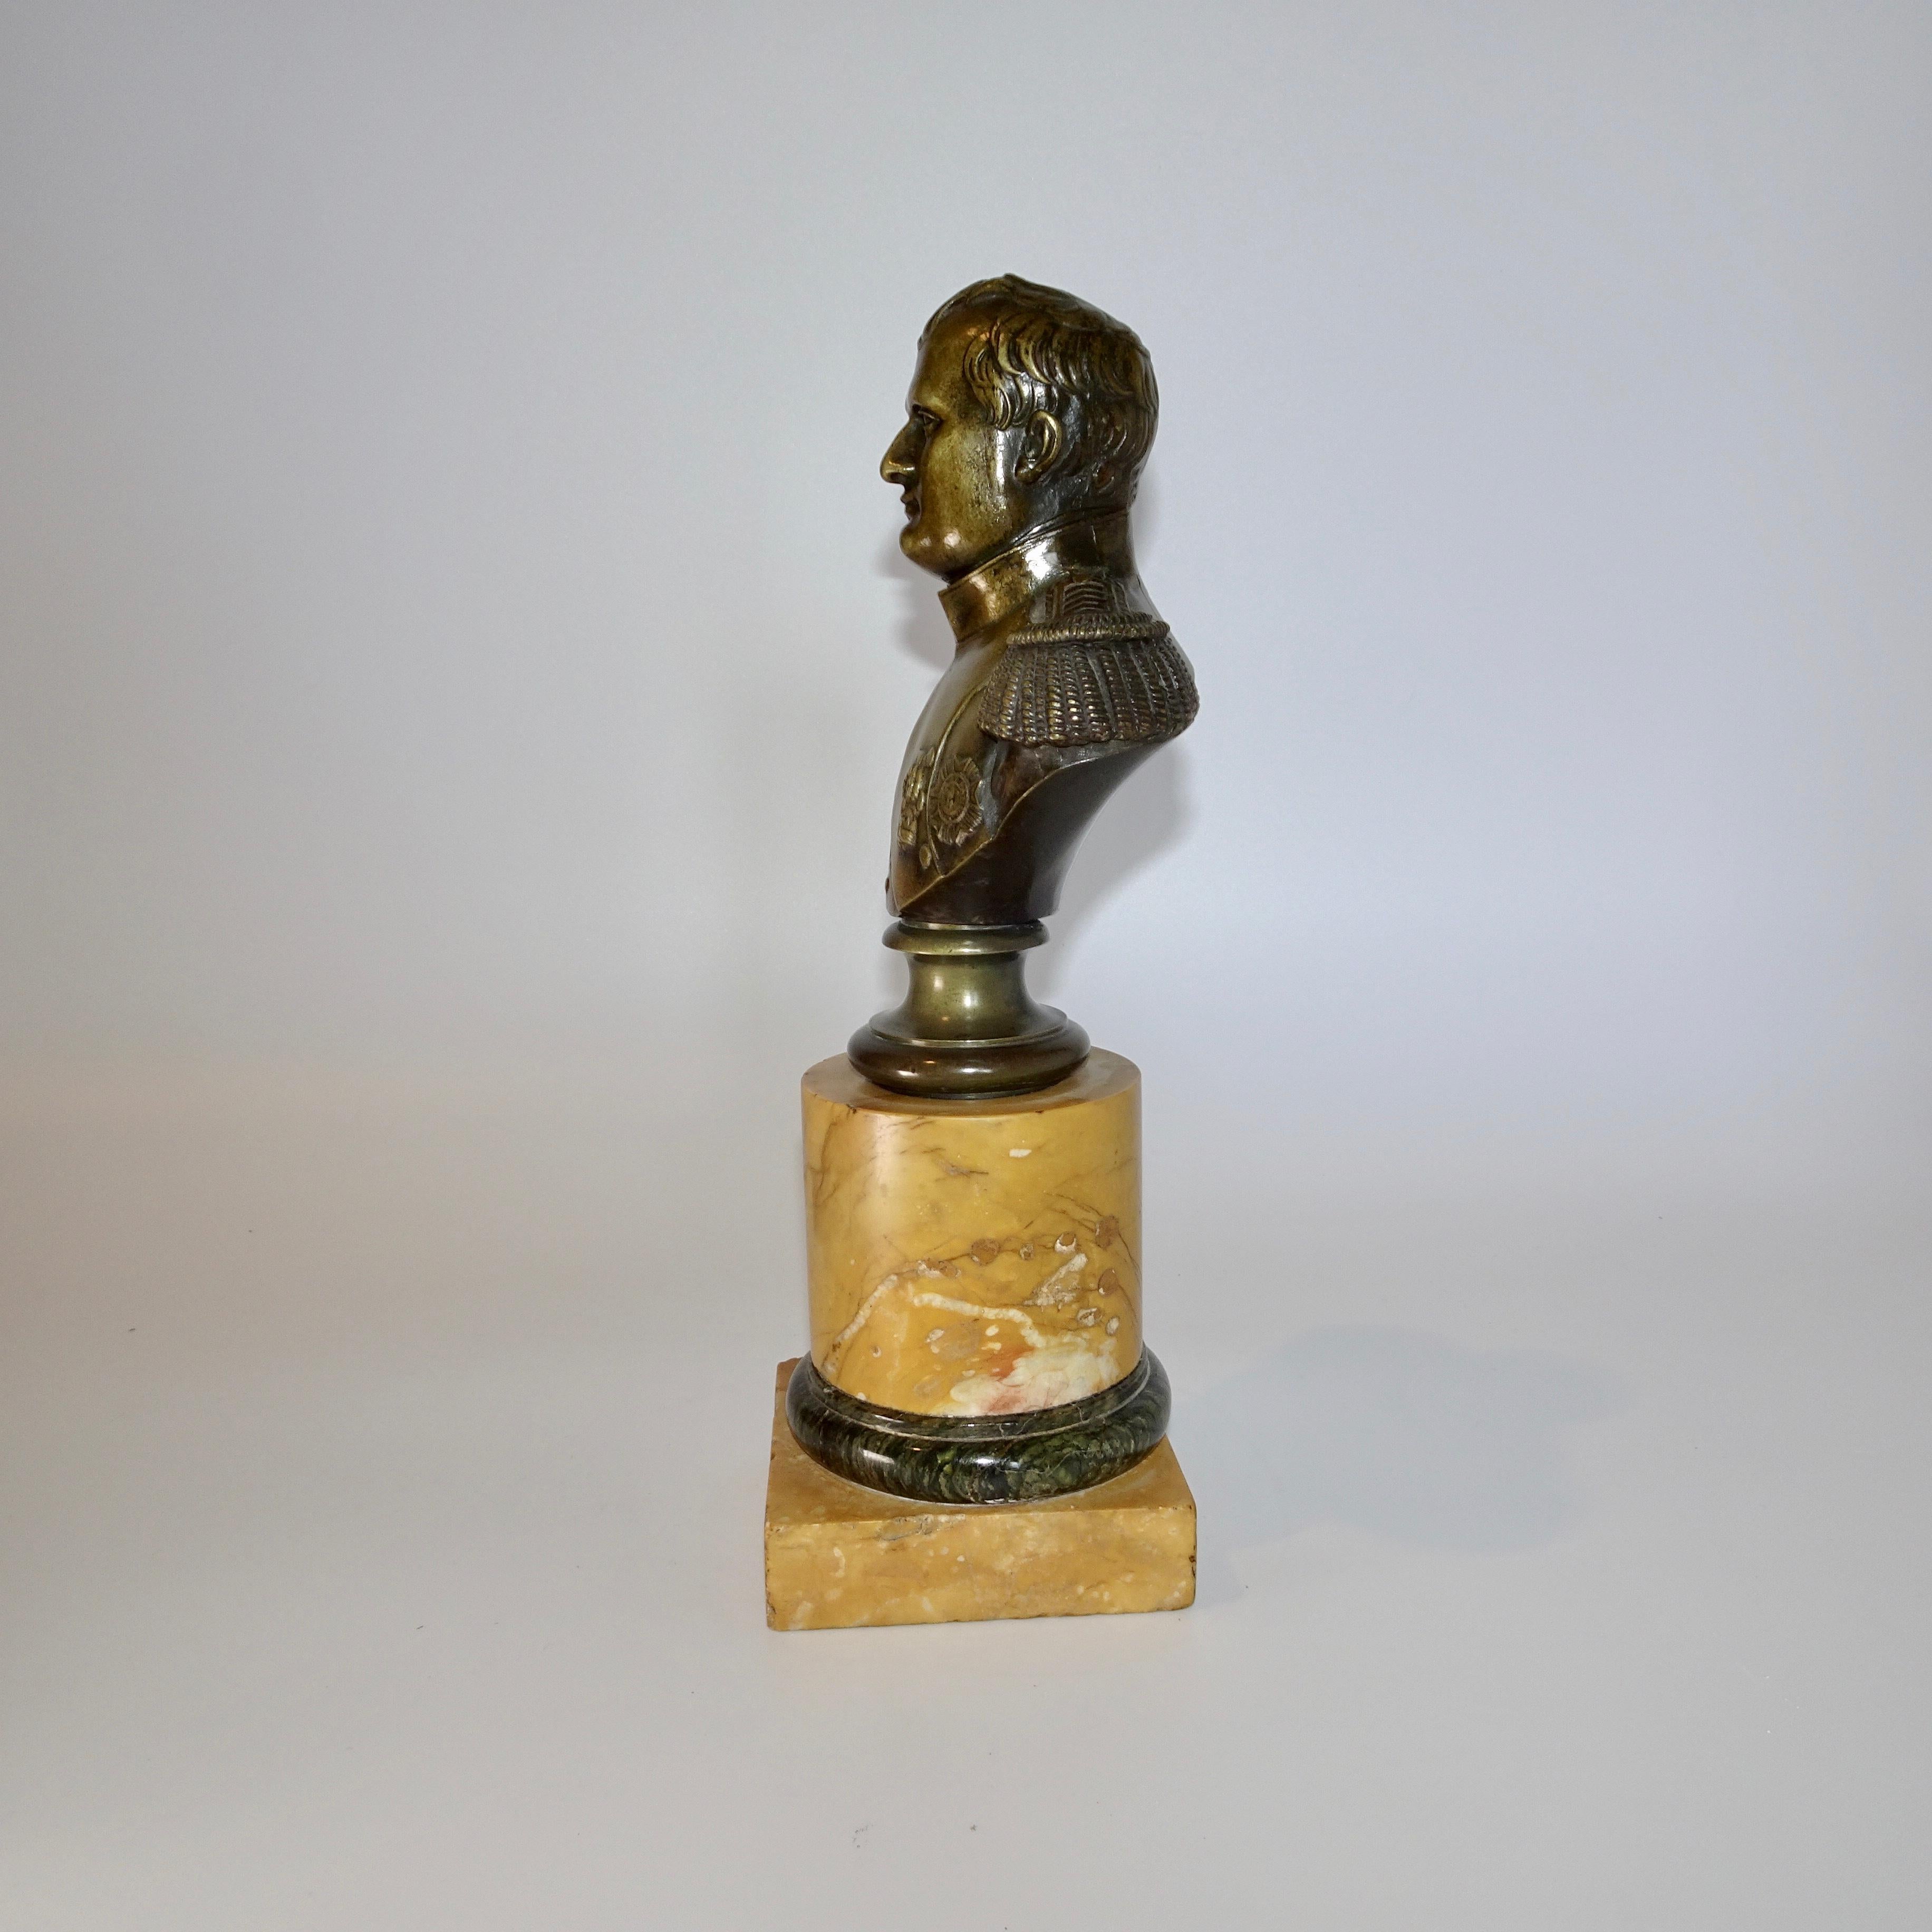 This is a 19th century bronze bust of Napoleon Bonaparte mounted on a beautiful yellow colored marble base. Napoleon Bonaparte was born August 15 1769 and died May 5 1821 Napoleon's campaigns are studied at military academies the world over. While